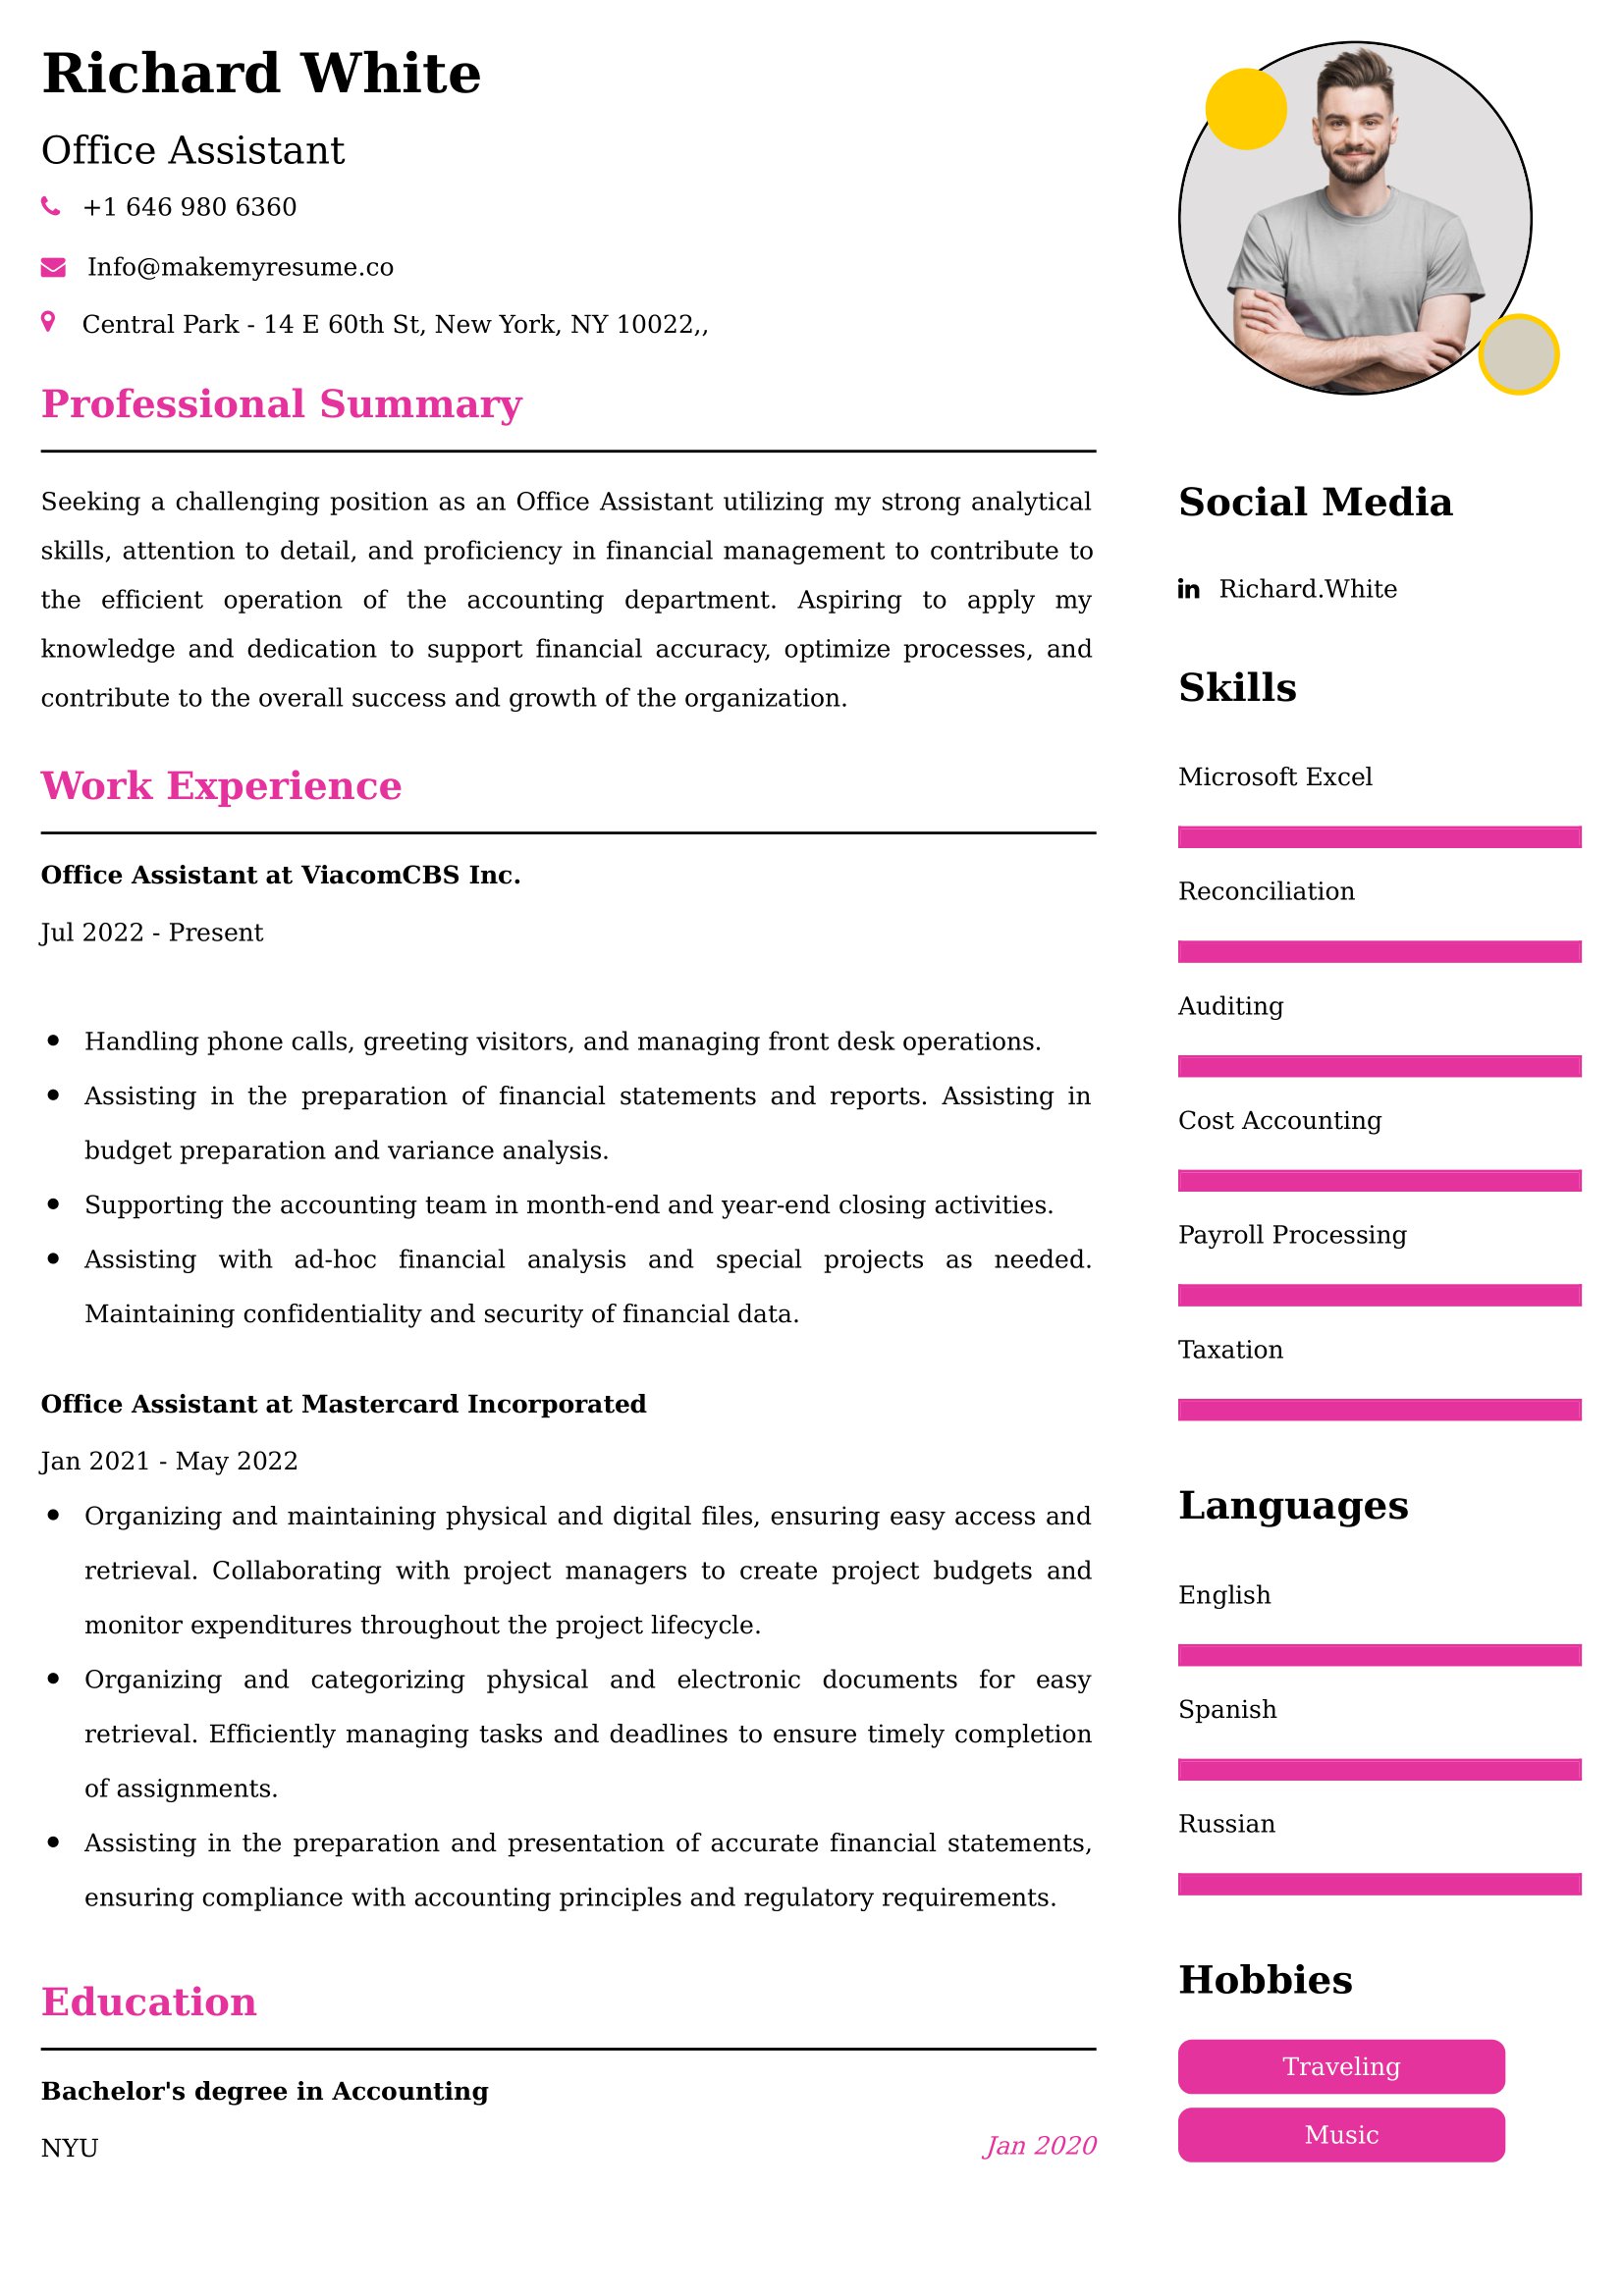 Office Assistant Resume Examples - UK Format, Latest Template.